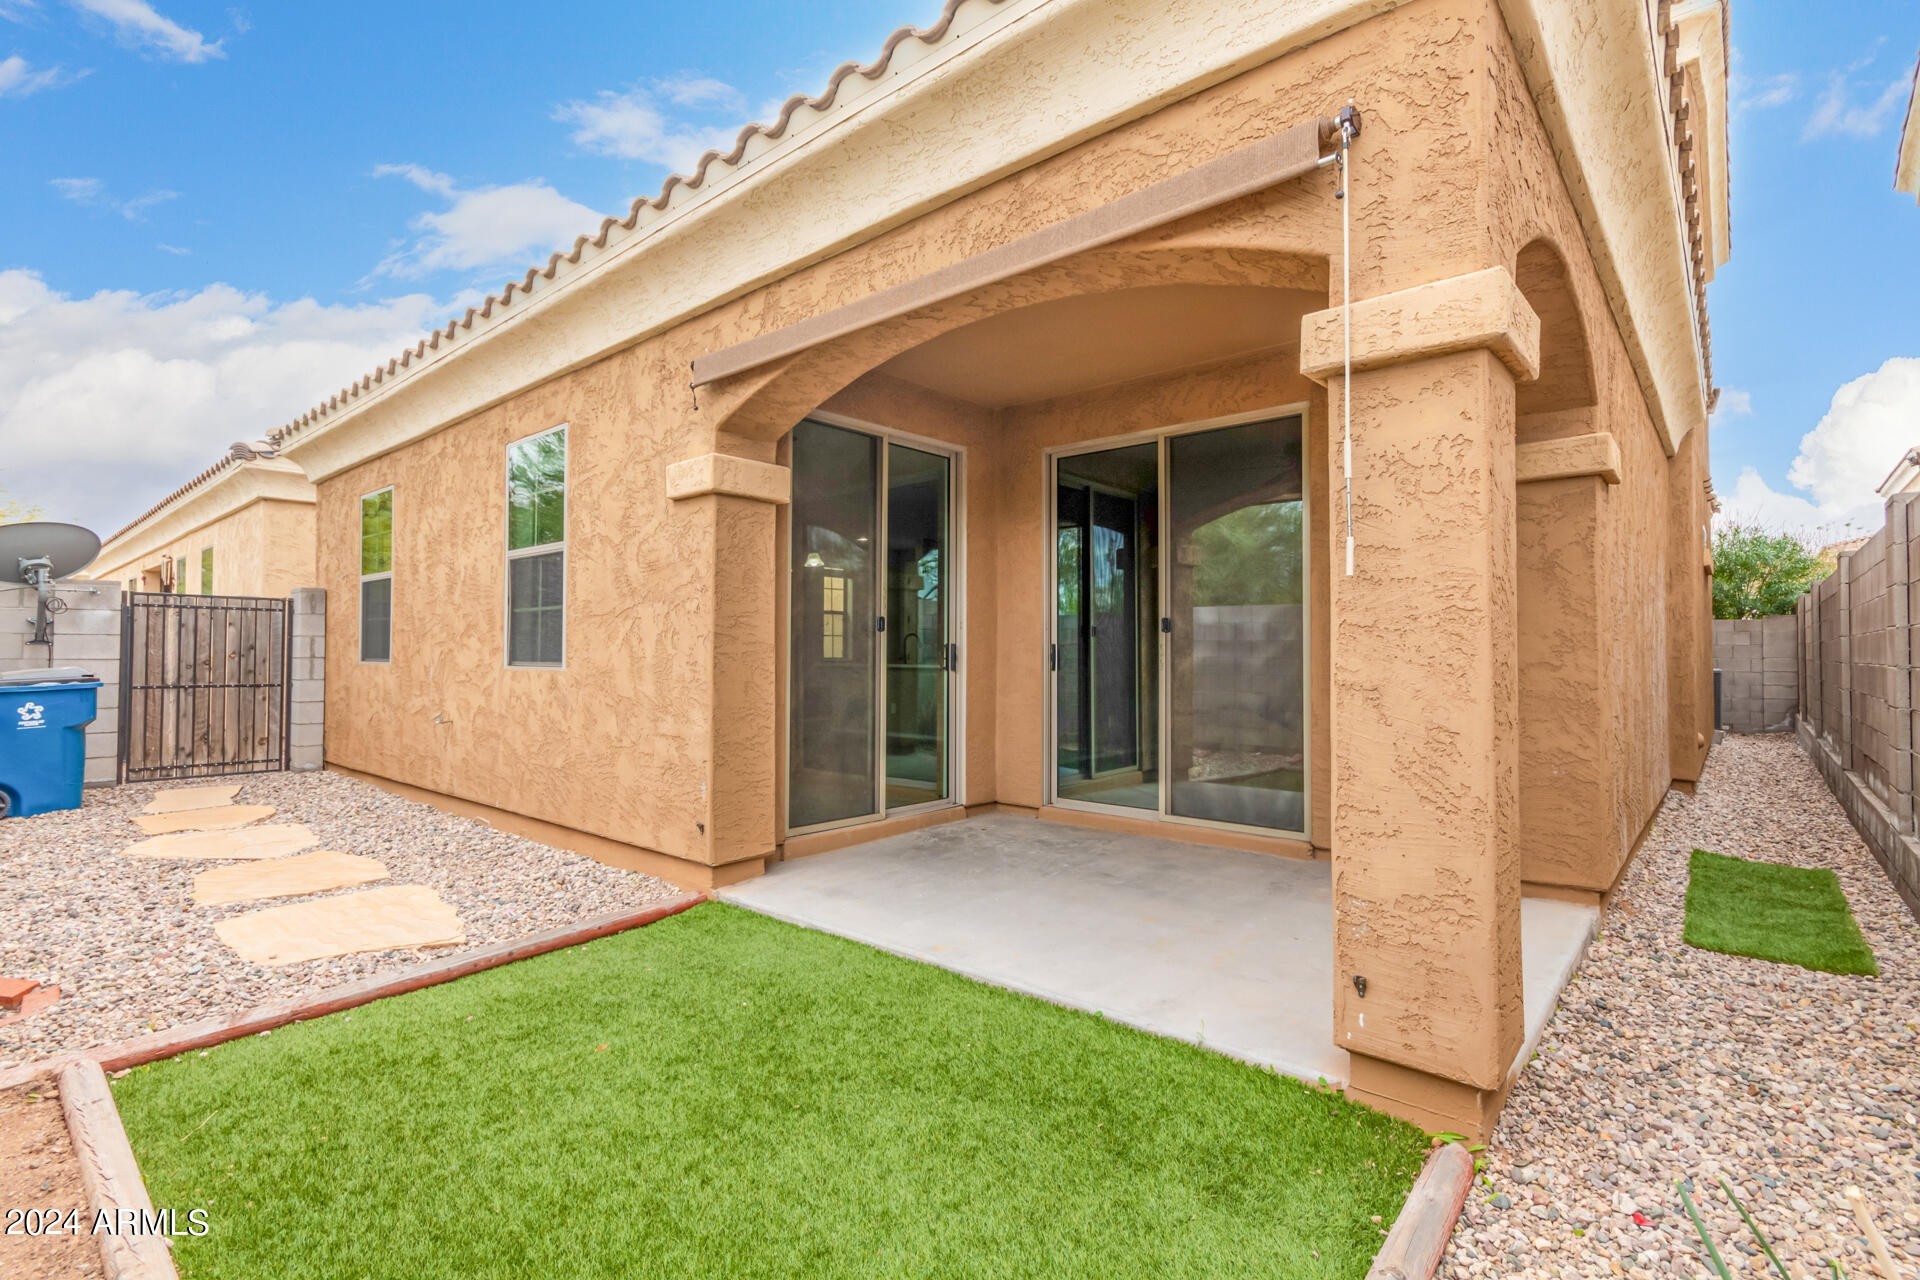 42. 1683 S Desert View Place